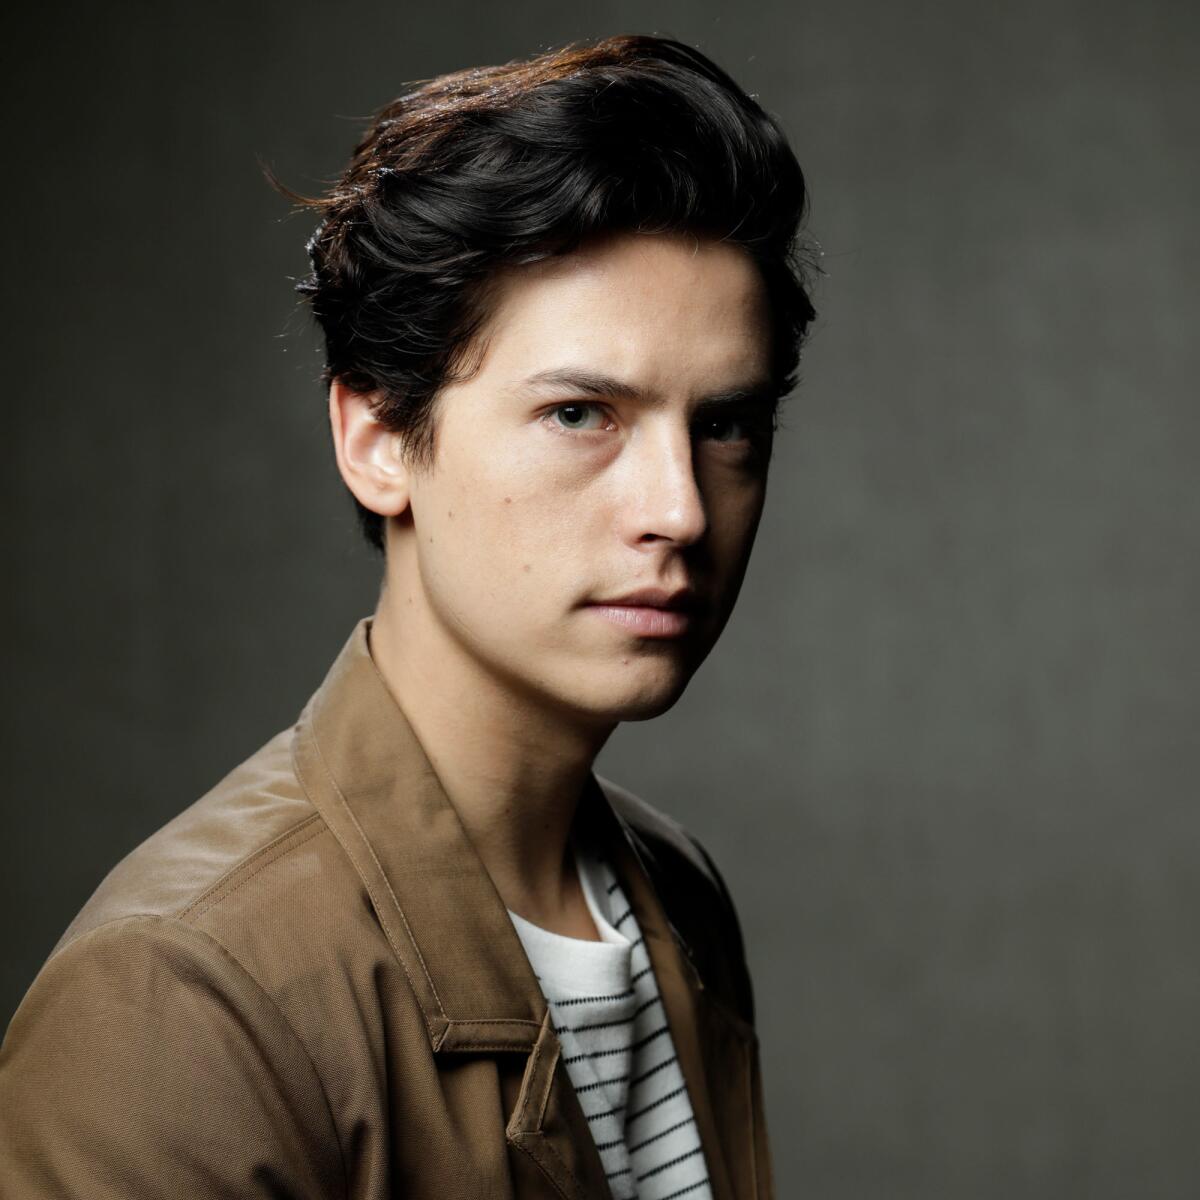 Riverdale's' Sprouse returns to Hollywood for 'Five Feet Apart